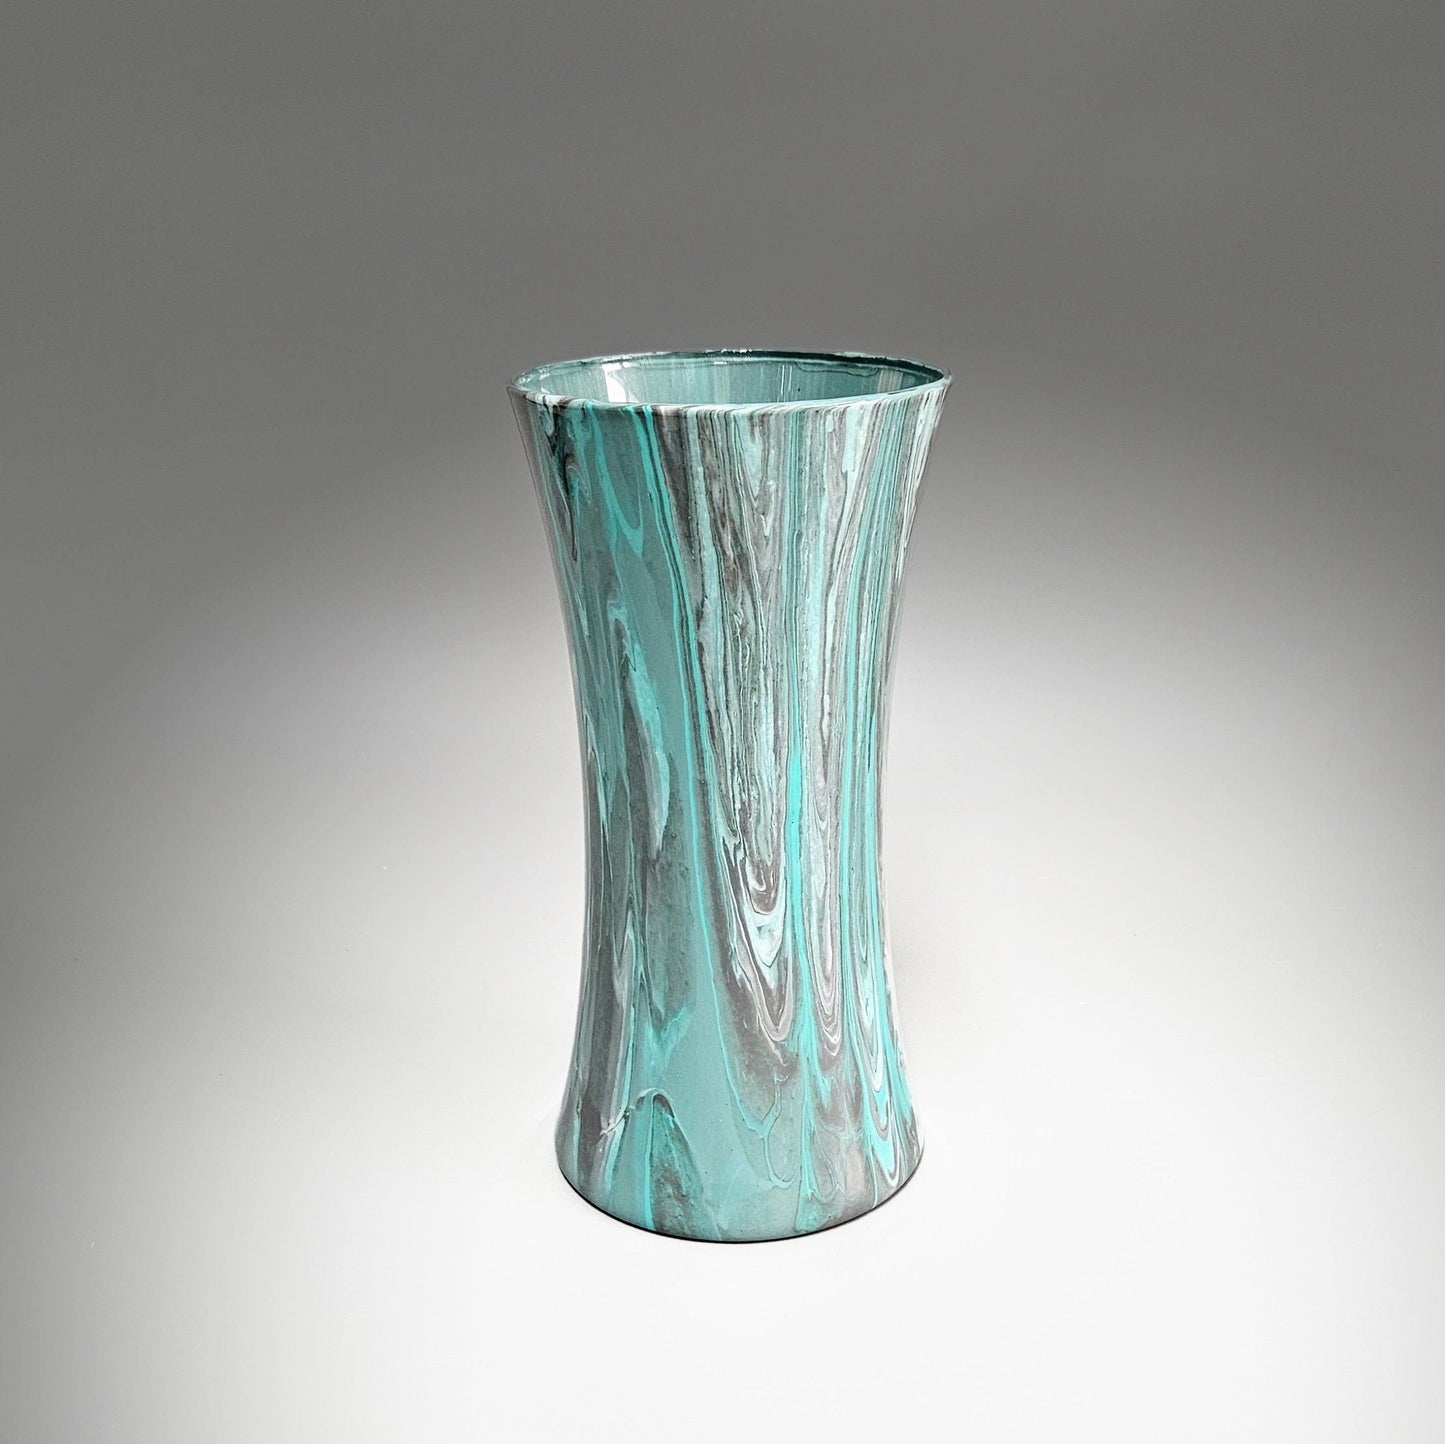 Abstract Painted Vase in Aqua and Gray, 8, 10.25 Inch